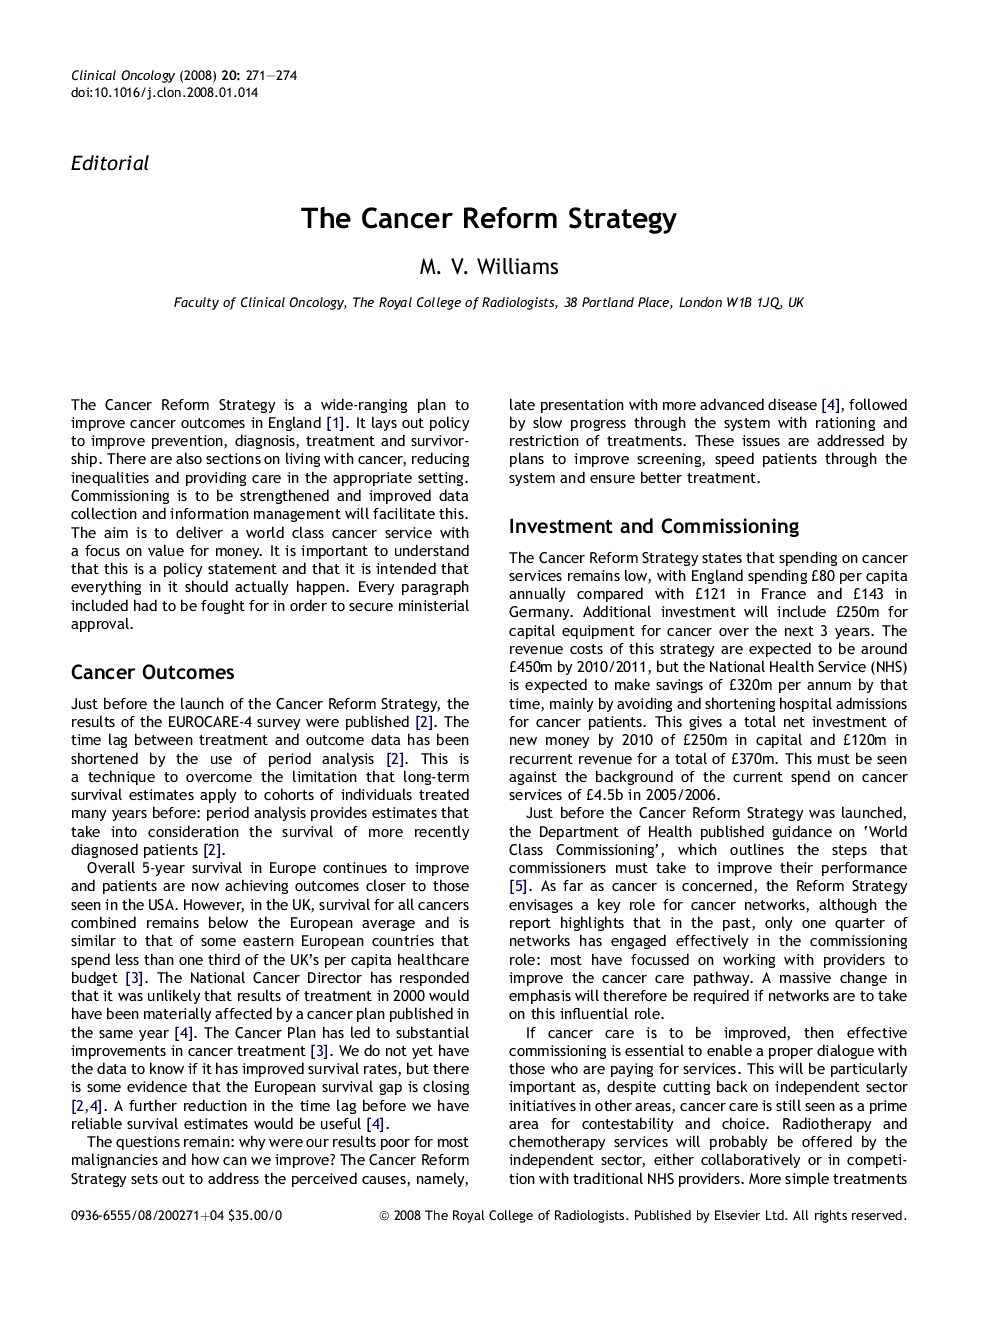 The Cancer Reform Strategy